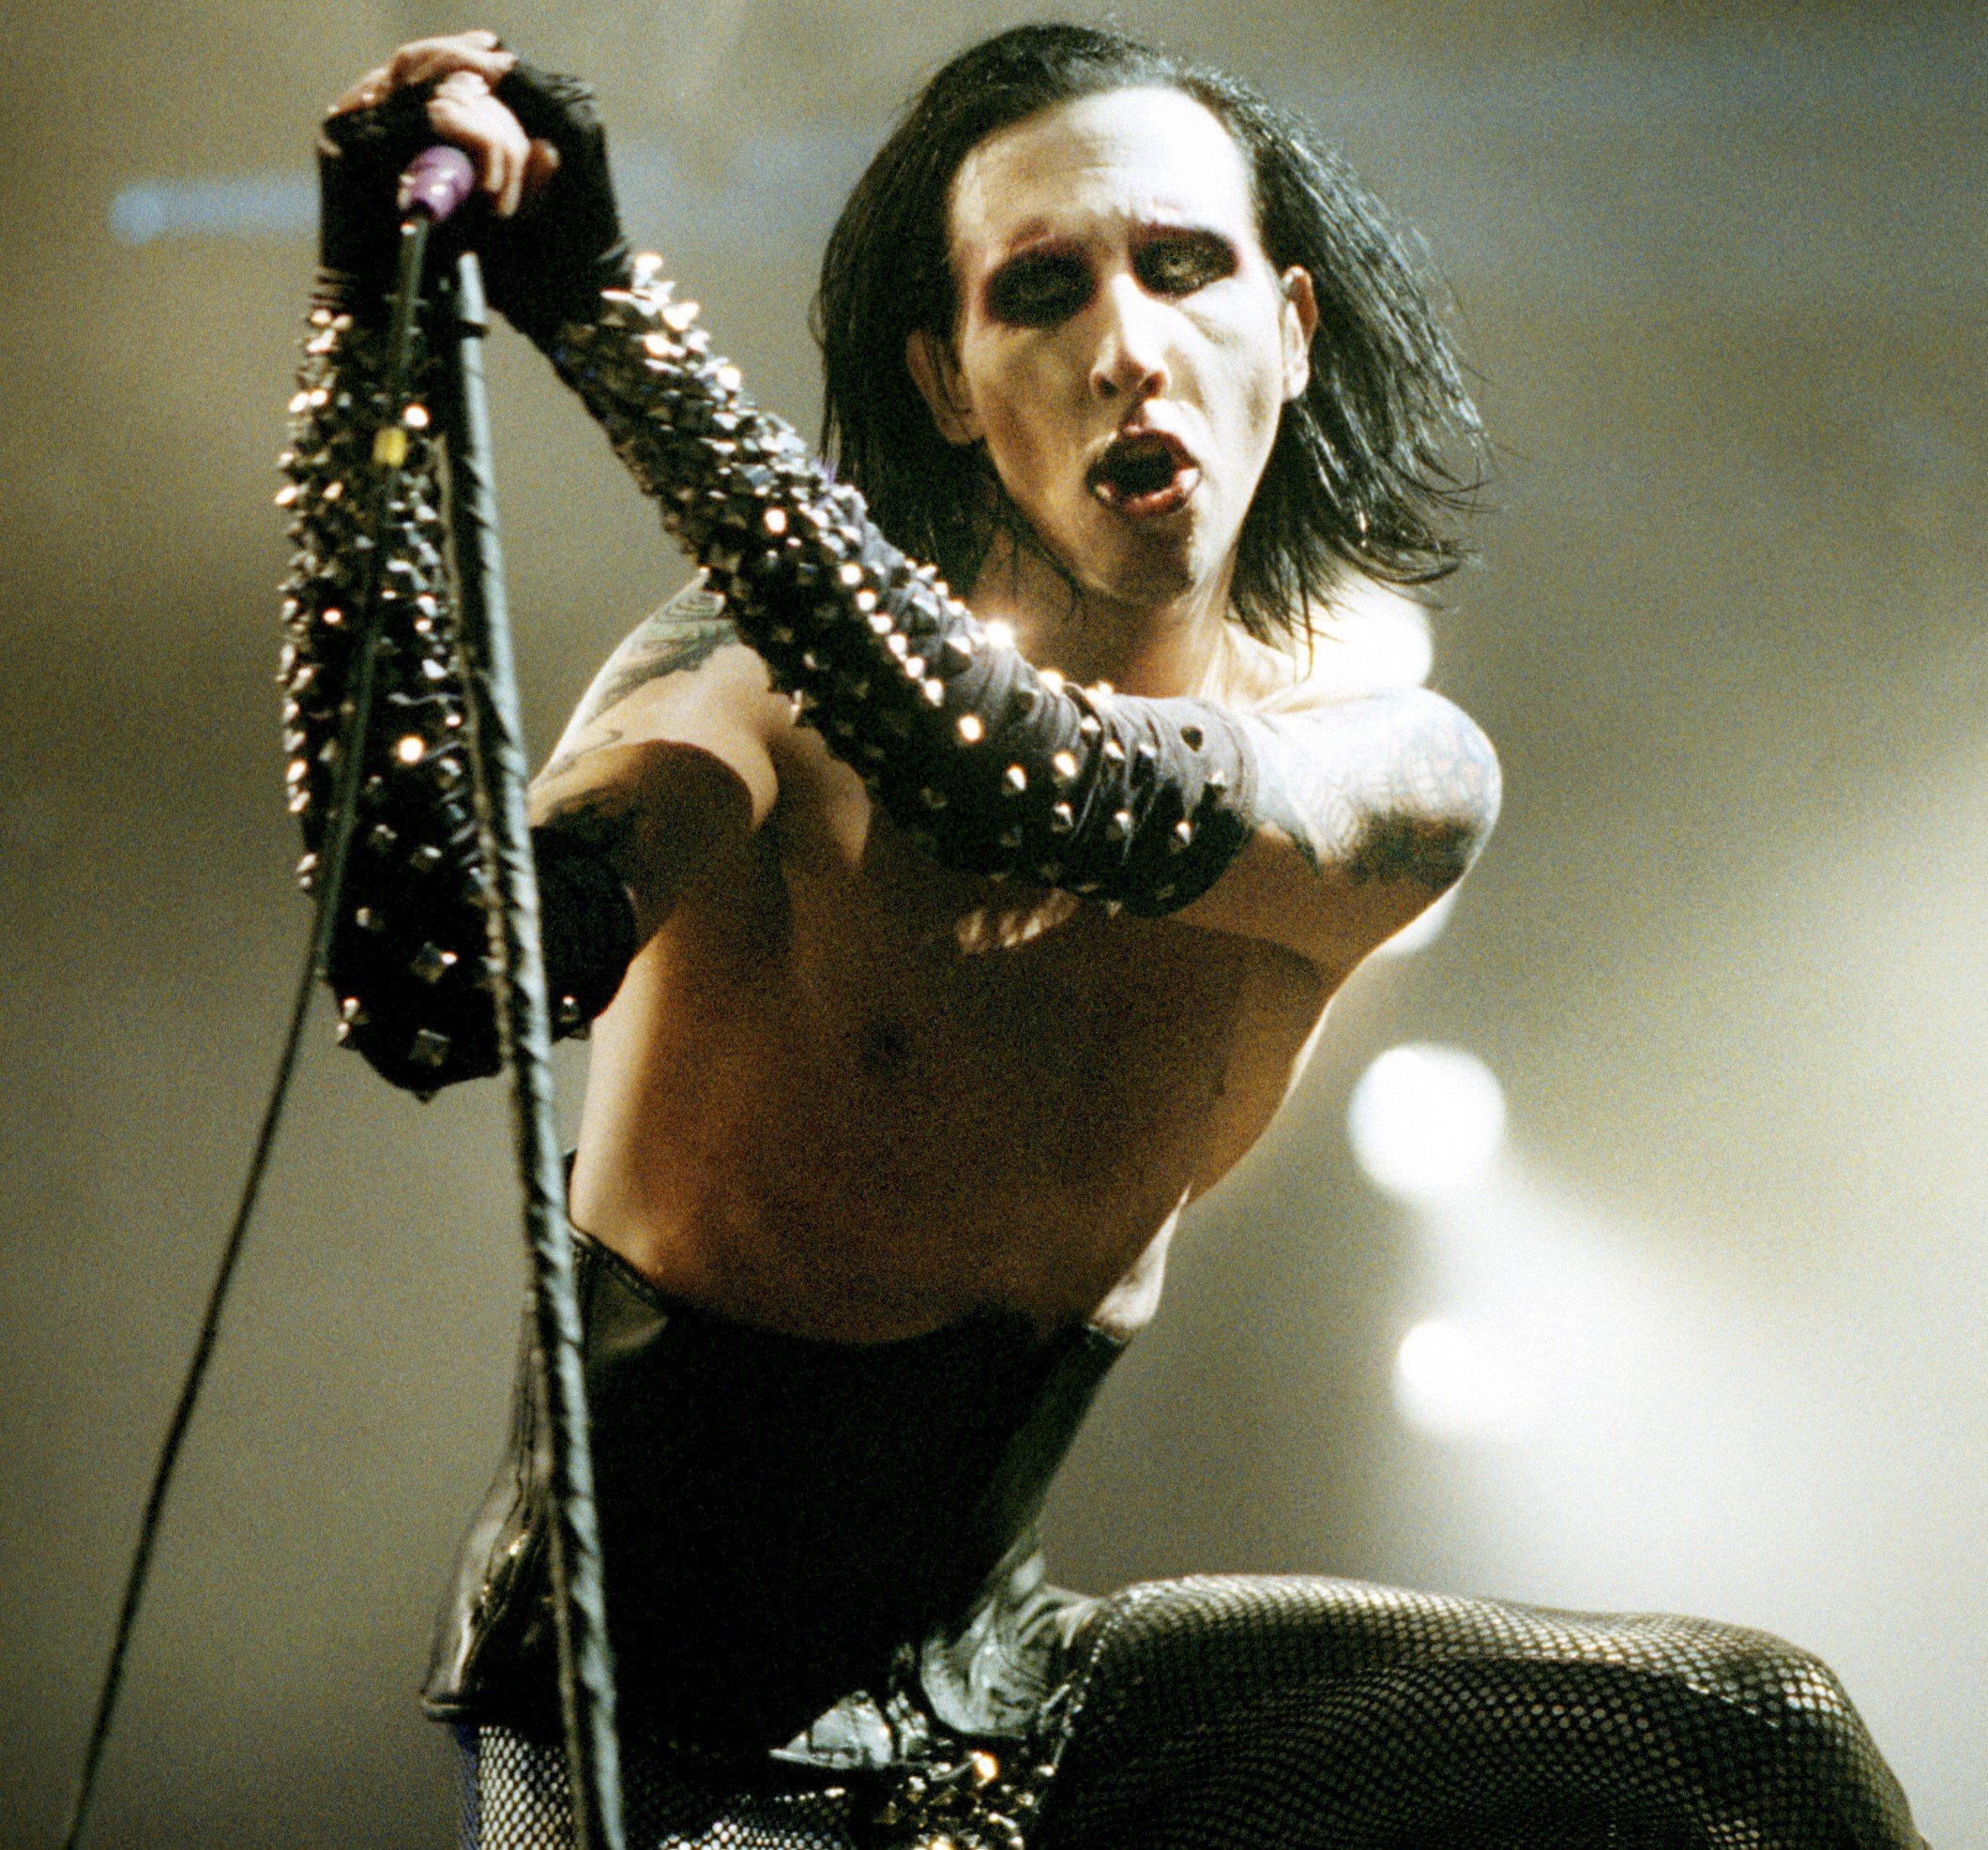 Marilyn Manson with a microphone